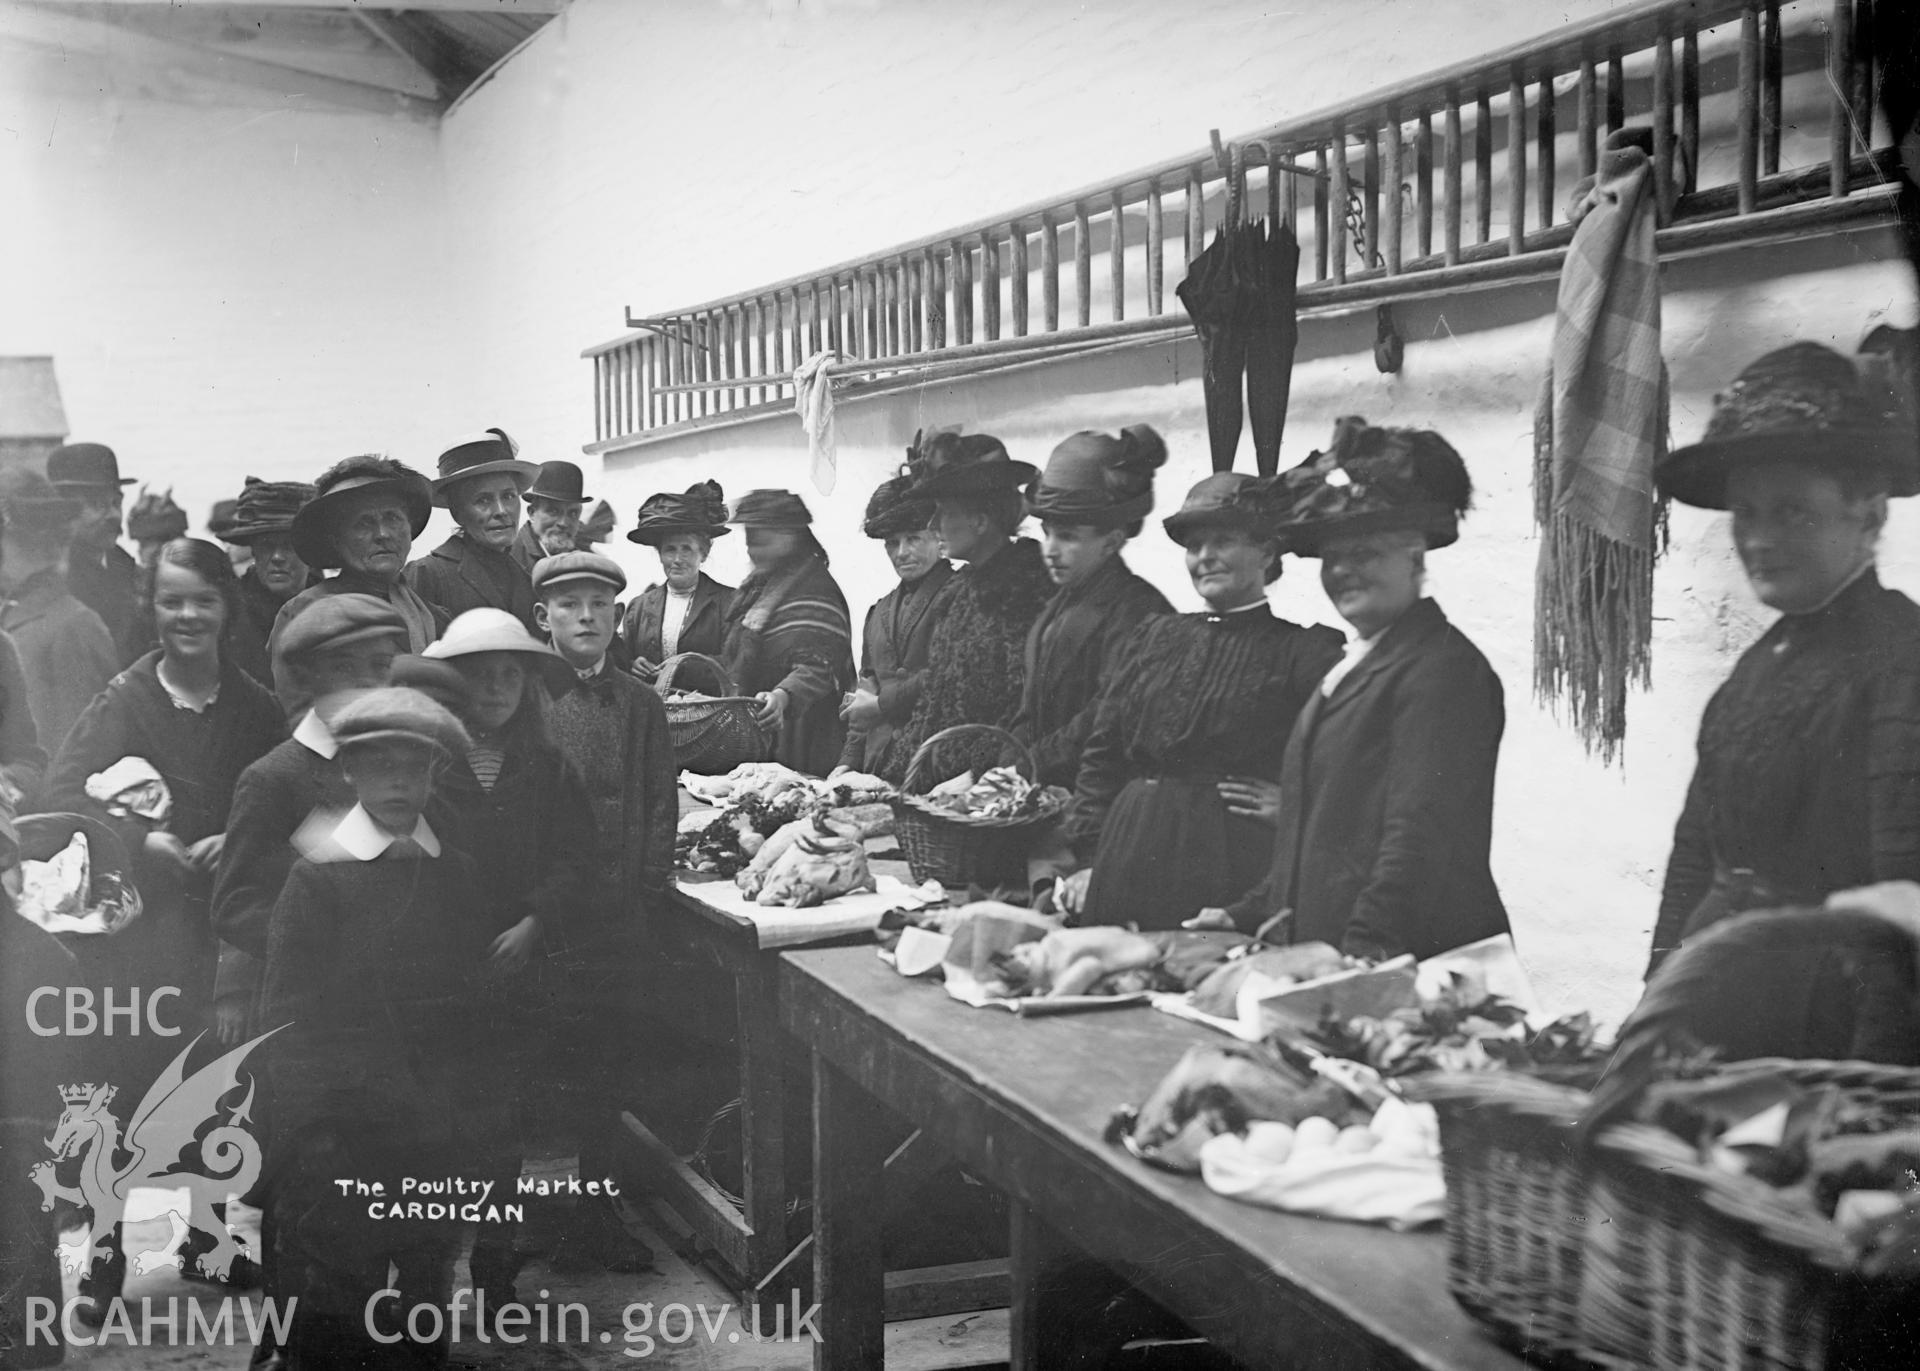 Black and white glass negative showing "The Poultry Market, Cardigan"